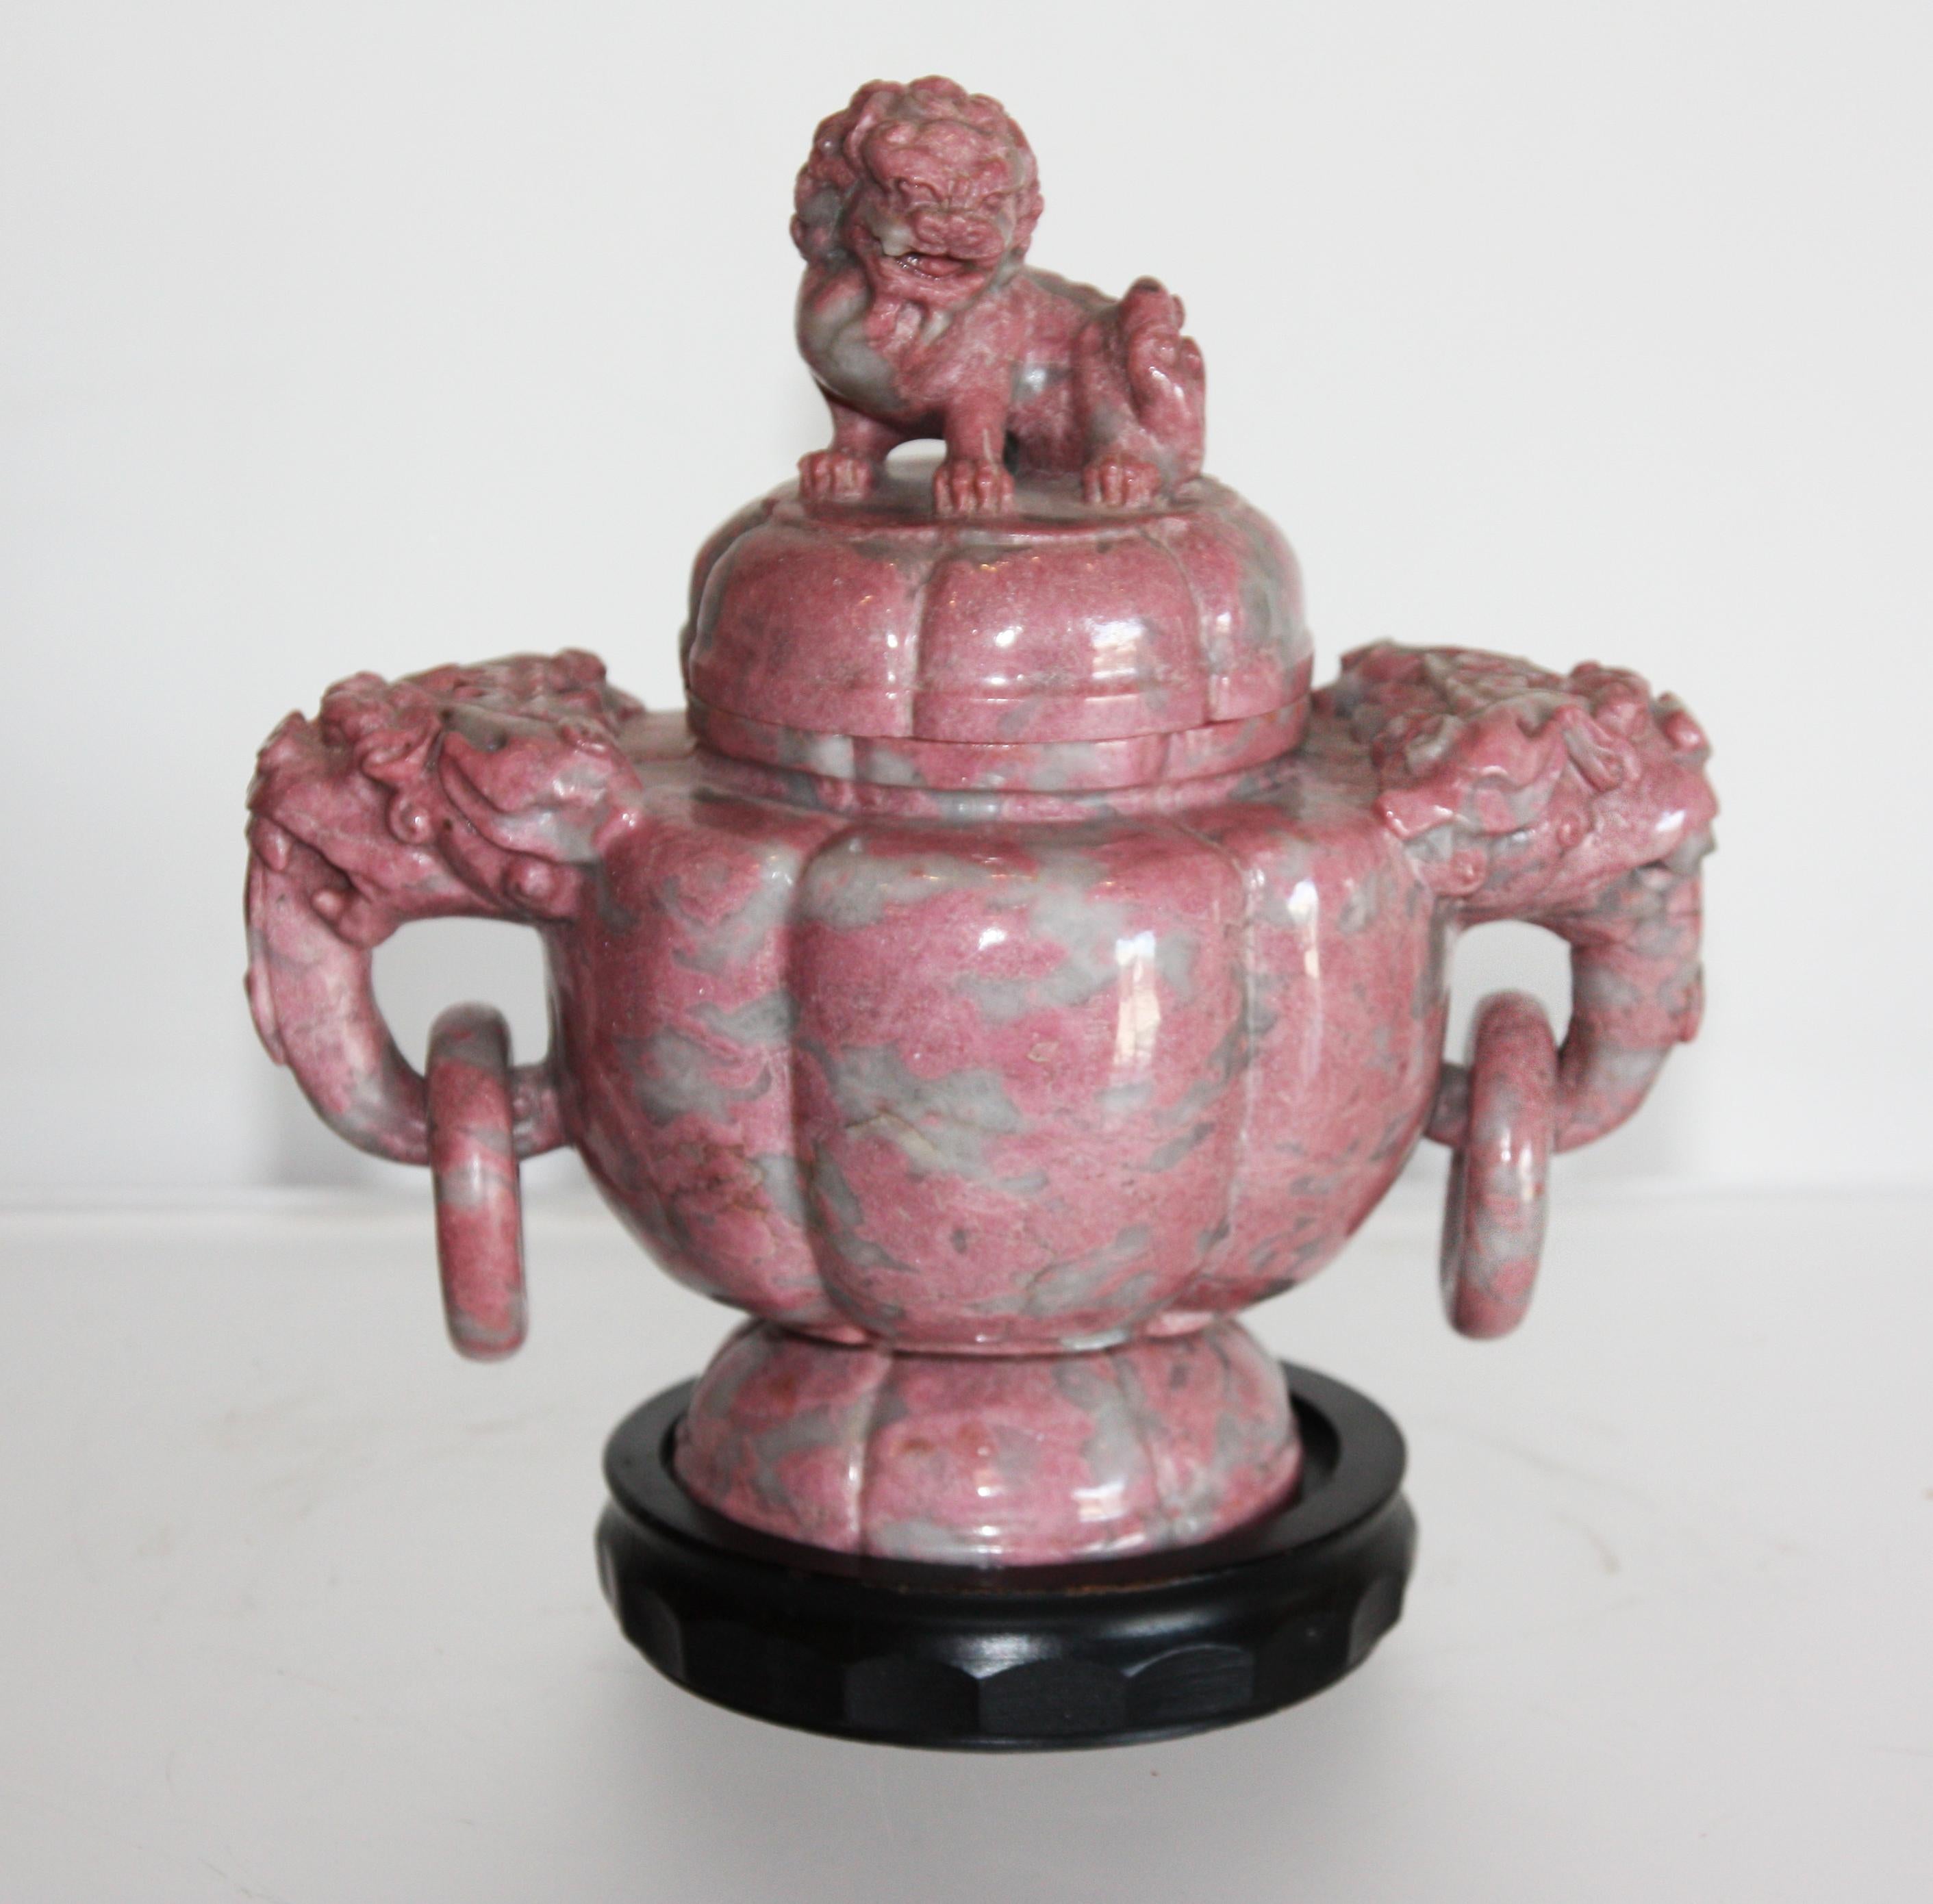 Three Chinese, hand-carved, pink, lidded marble urns with plinths. Foo dog, Lion, and elephant figured on each urn.

Dimensions given are for the large rectangular urn. 

Dimensions for small round urn depth 5.5 inches, width 8.5 inches, height